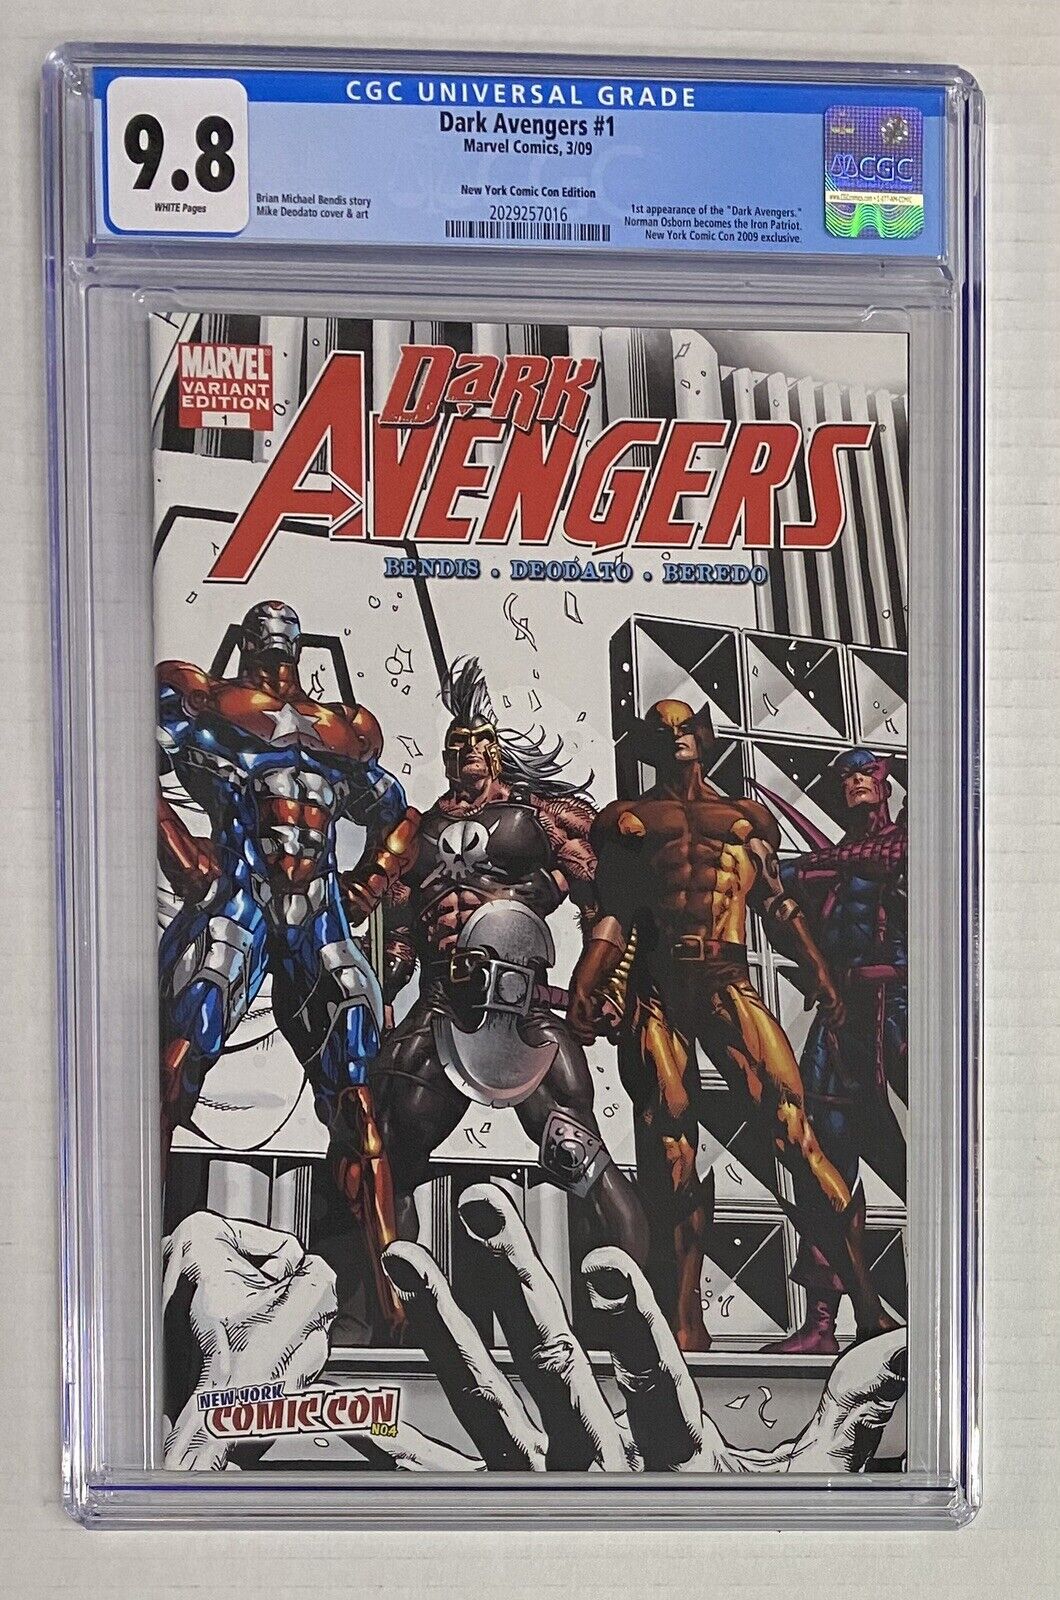 Dark Avengers #1 NYCC Comic Con Variant Limited to 2000 1st Iron Patriot CGC 9.8